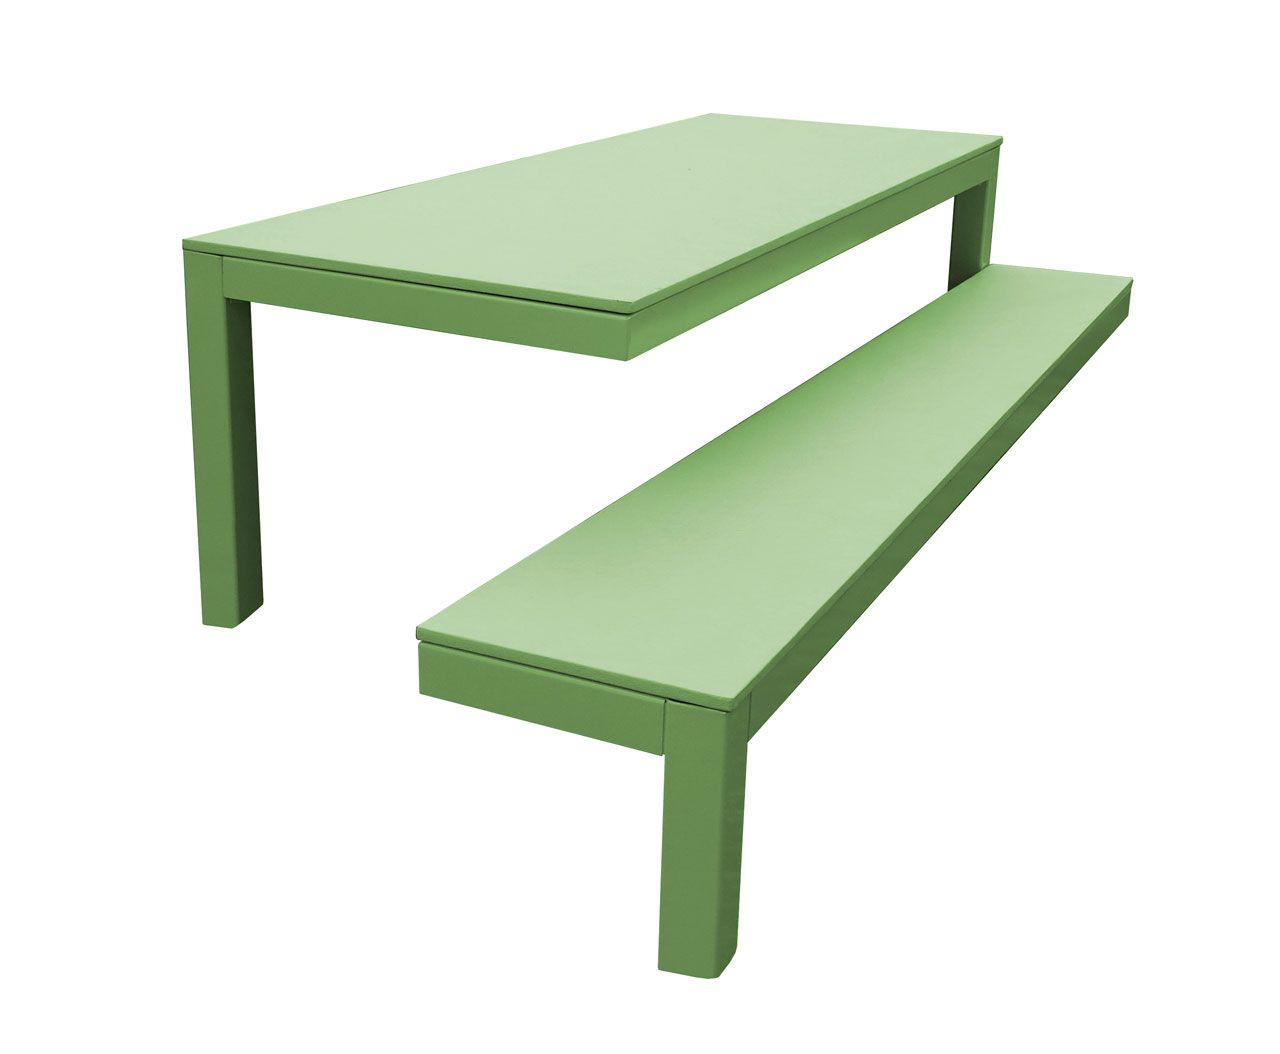 A Three Legged Picnic Table That Appears To Defy Gravity Regarding Trendy 3 Leg Outdoor Tables (View 8 of 15)